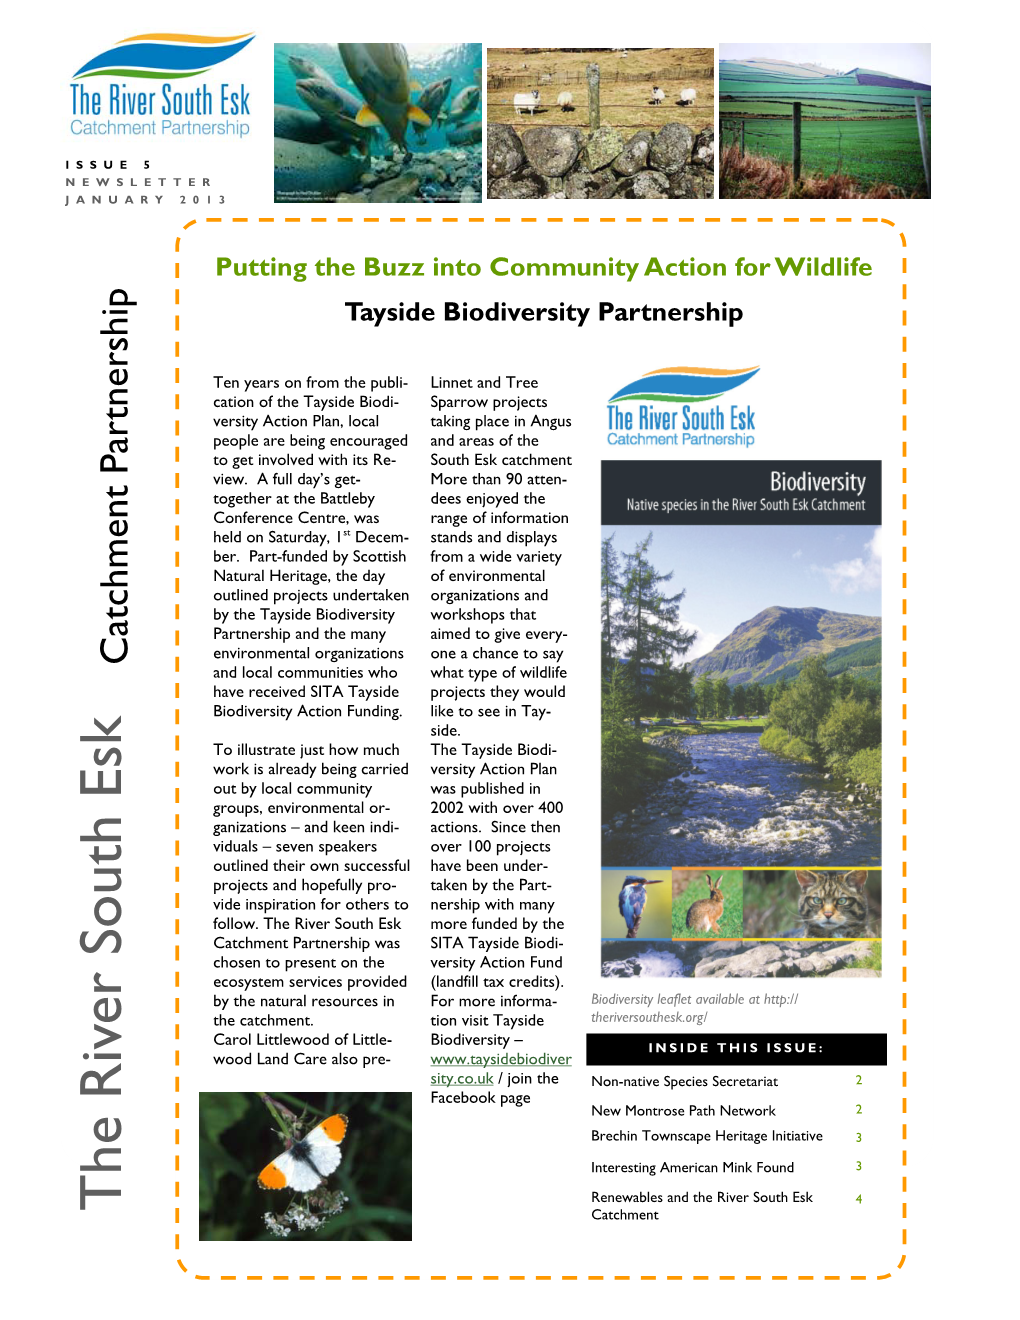 The River South Esk Catchment Partnership Newsletter